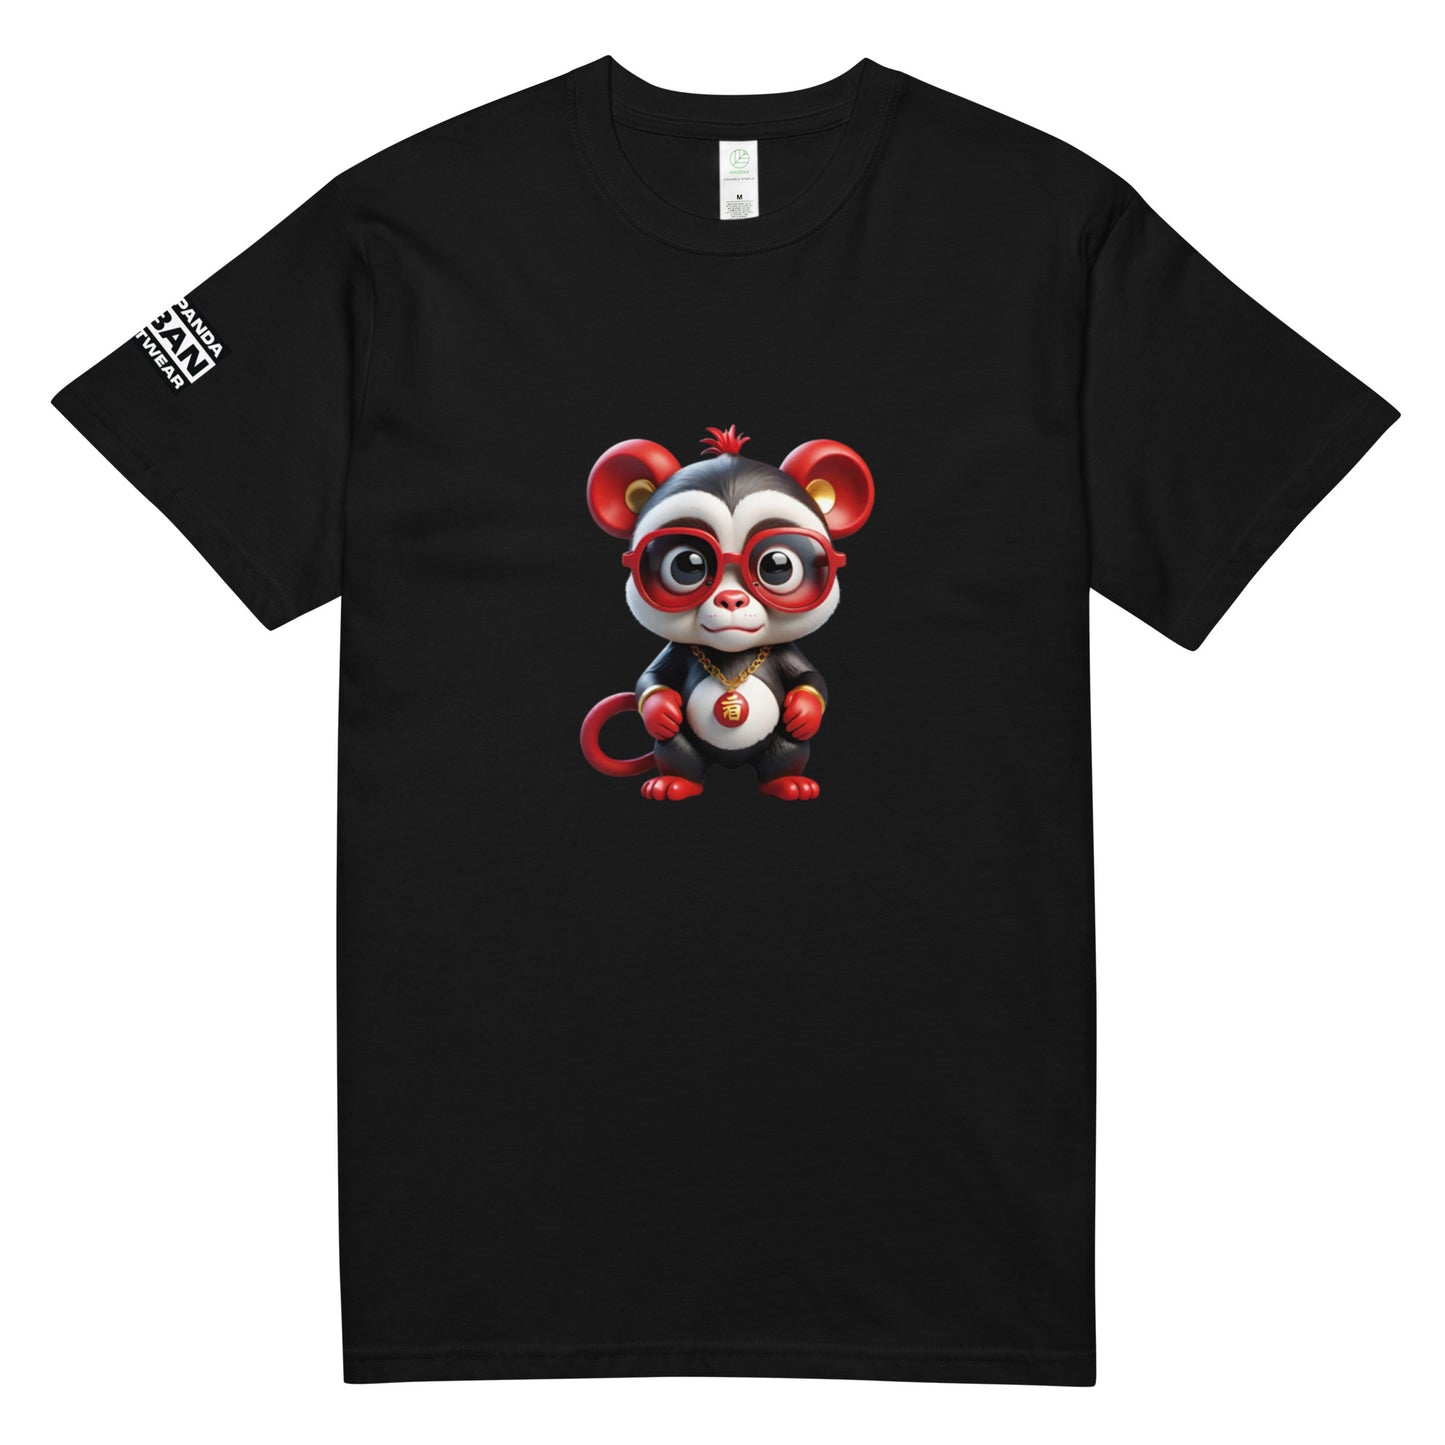 YEAR OF THE PANDKEY